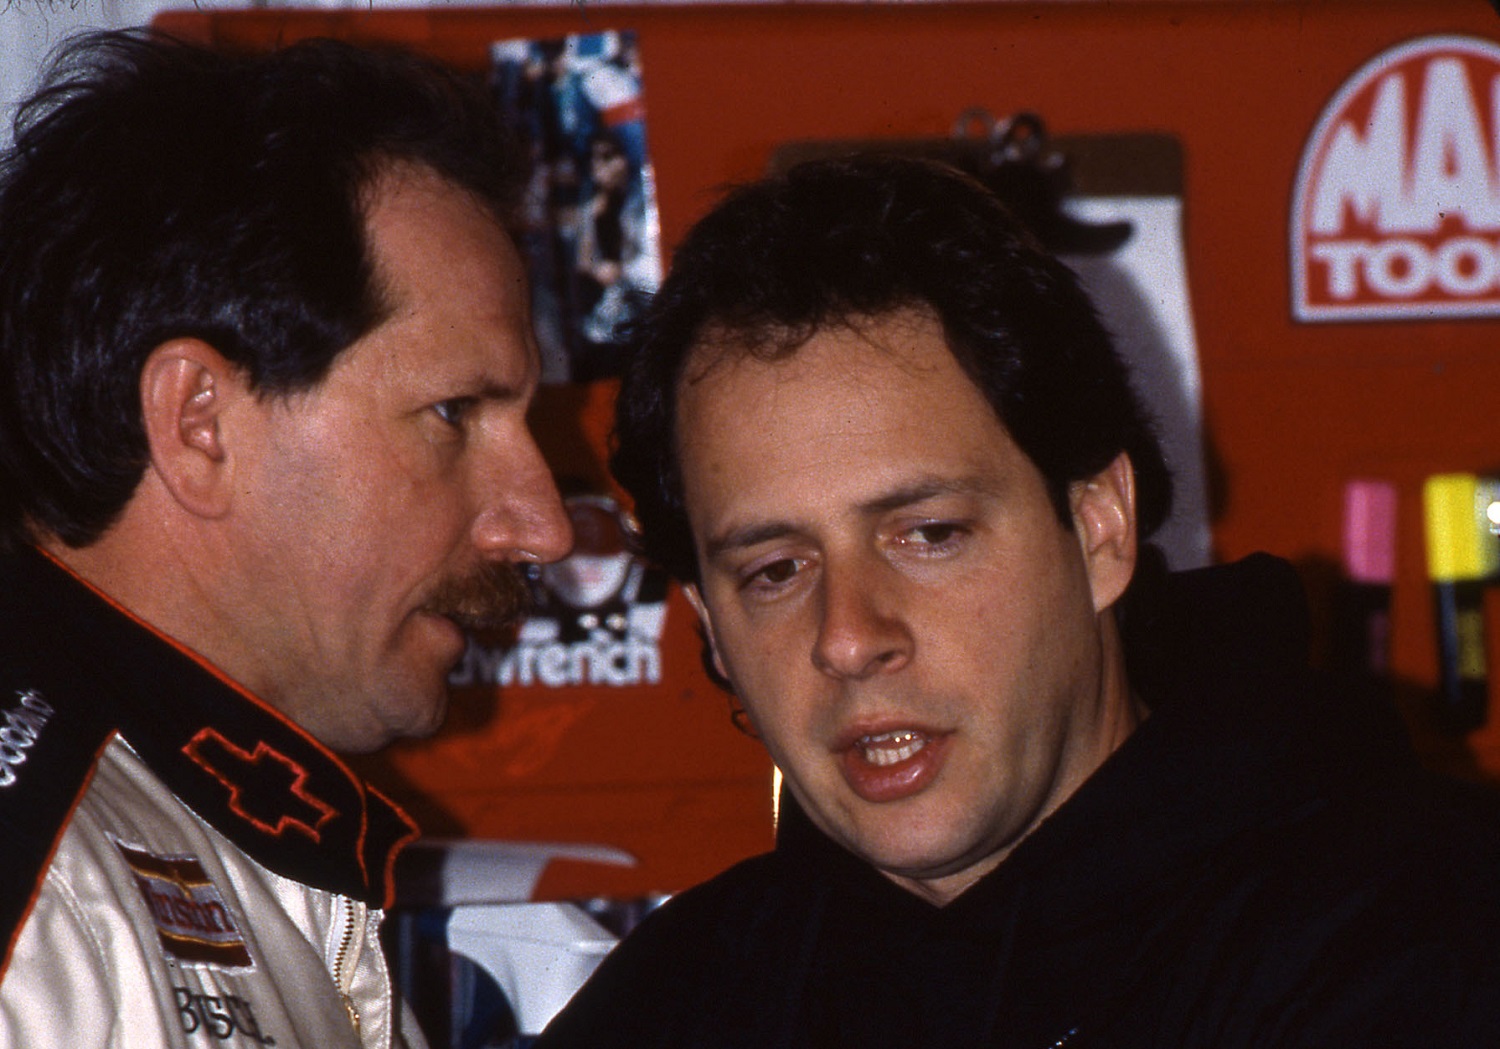 Kirk Shelmerdine was crew chief for Richard Childress Racing and driver Dale Earnhardt from 1982 through 1992, scoring 46 NASCAR Cup victories, along with winning four Cup championships.